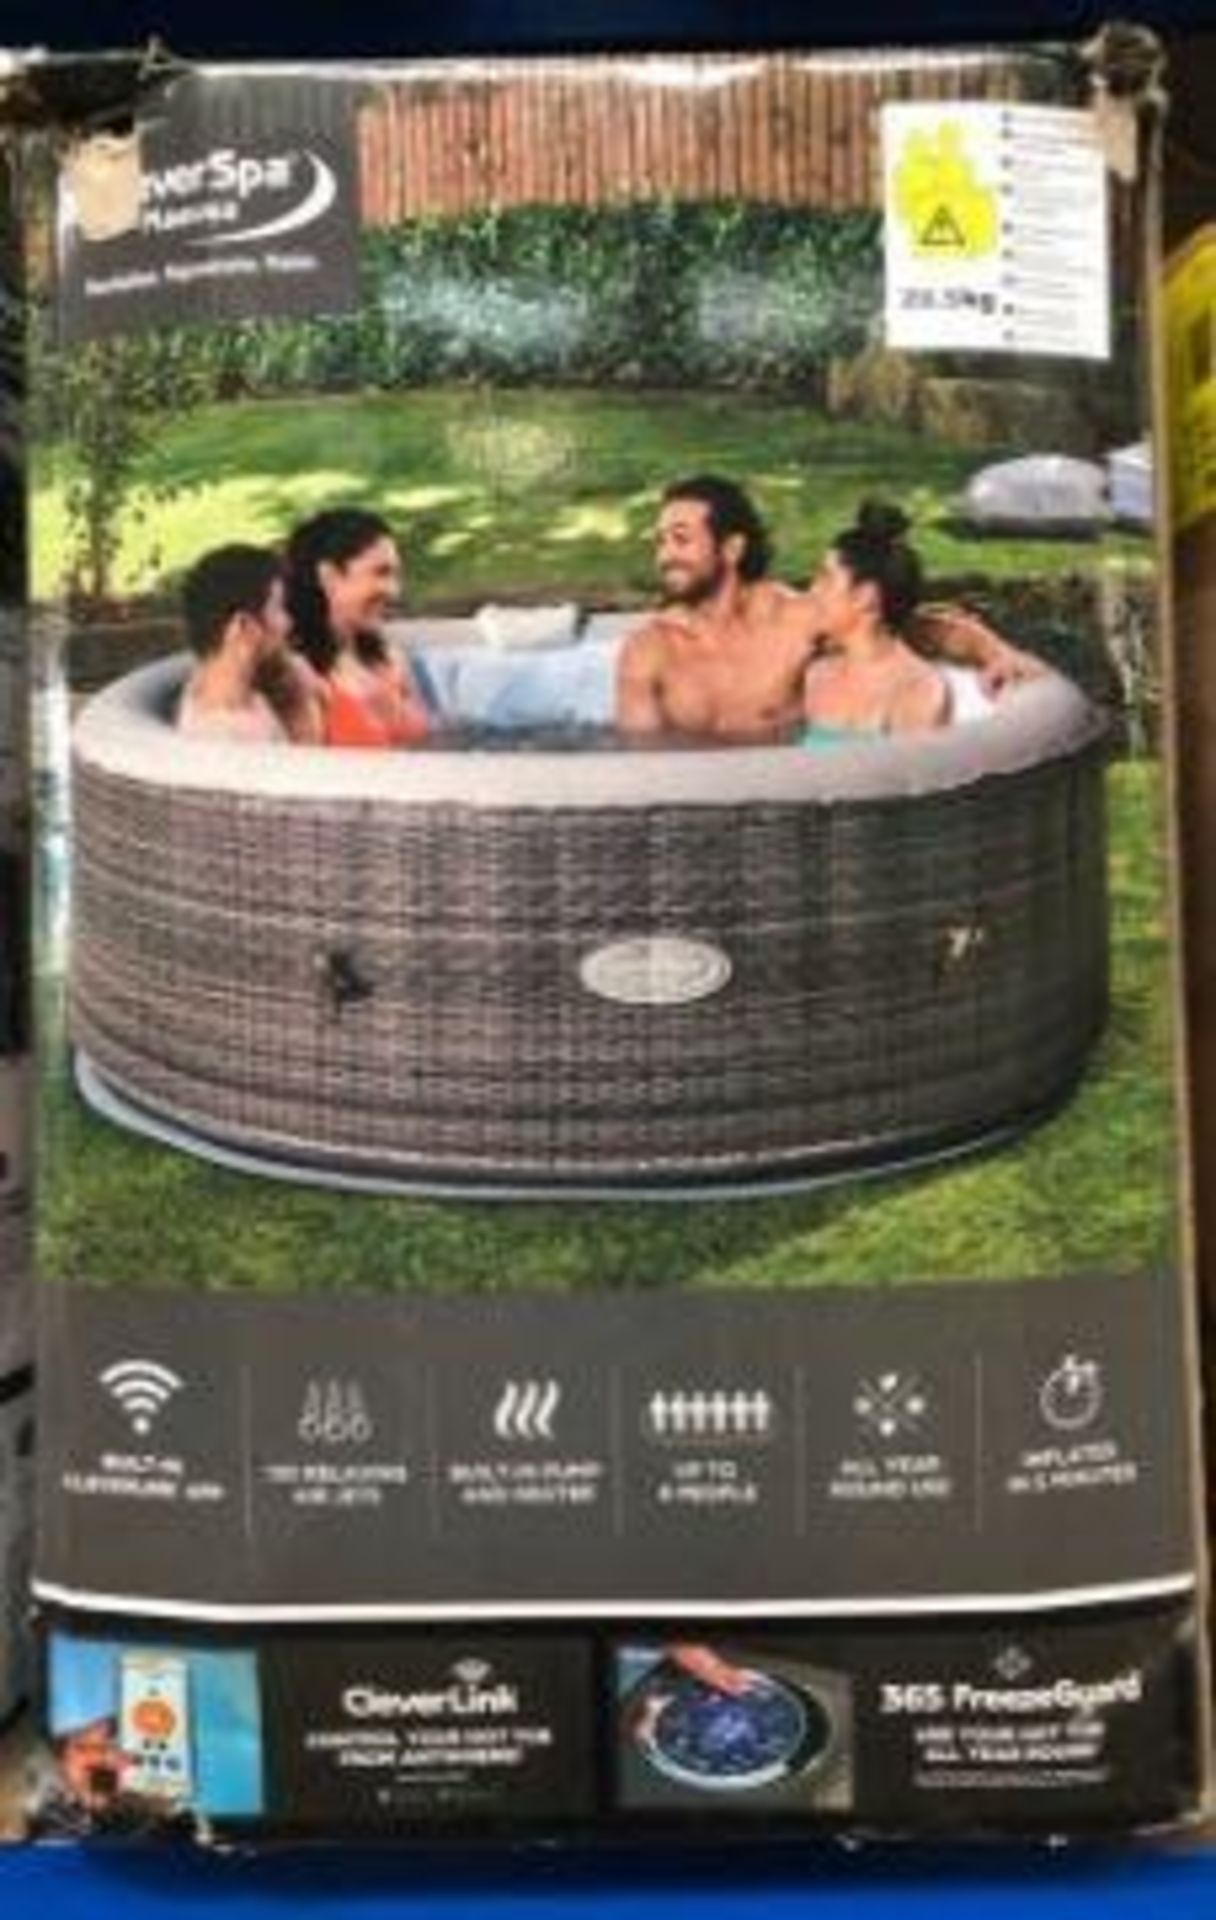 CLEVERSPA MAEVE 6 PERSON HOT TUB, RRP £524.12, WAREHOUSE CLEARANCE STOCK, NO RESERVE *NO VAT*